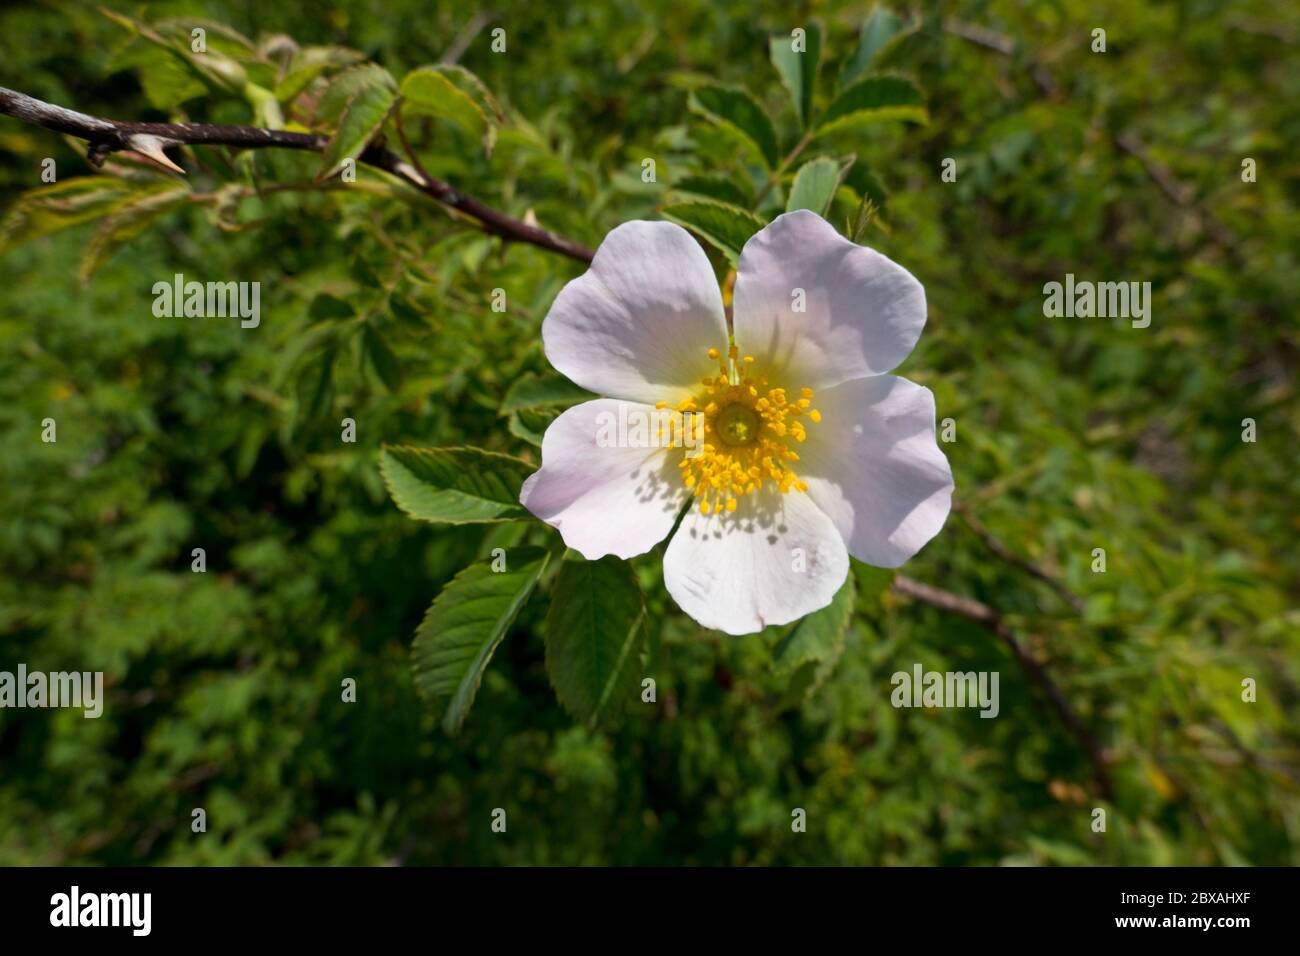 Burnet rose, pink white flower with yellow stamens Stock Photo